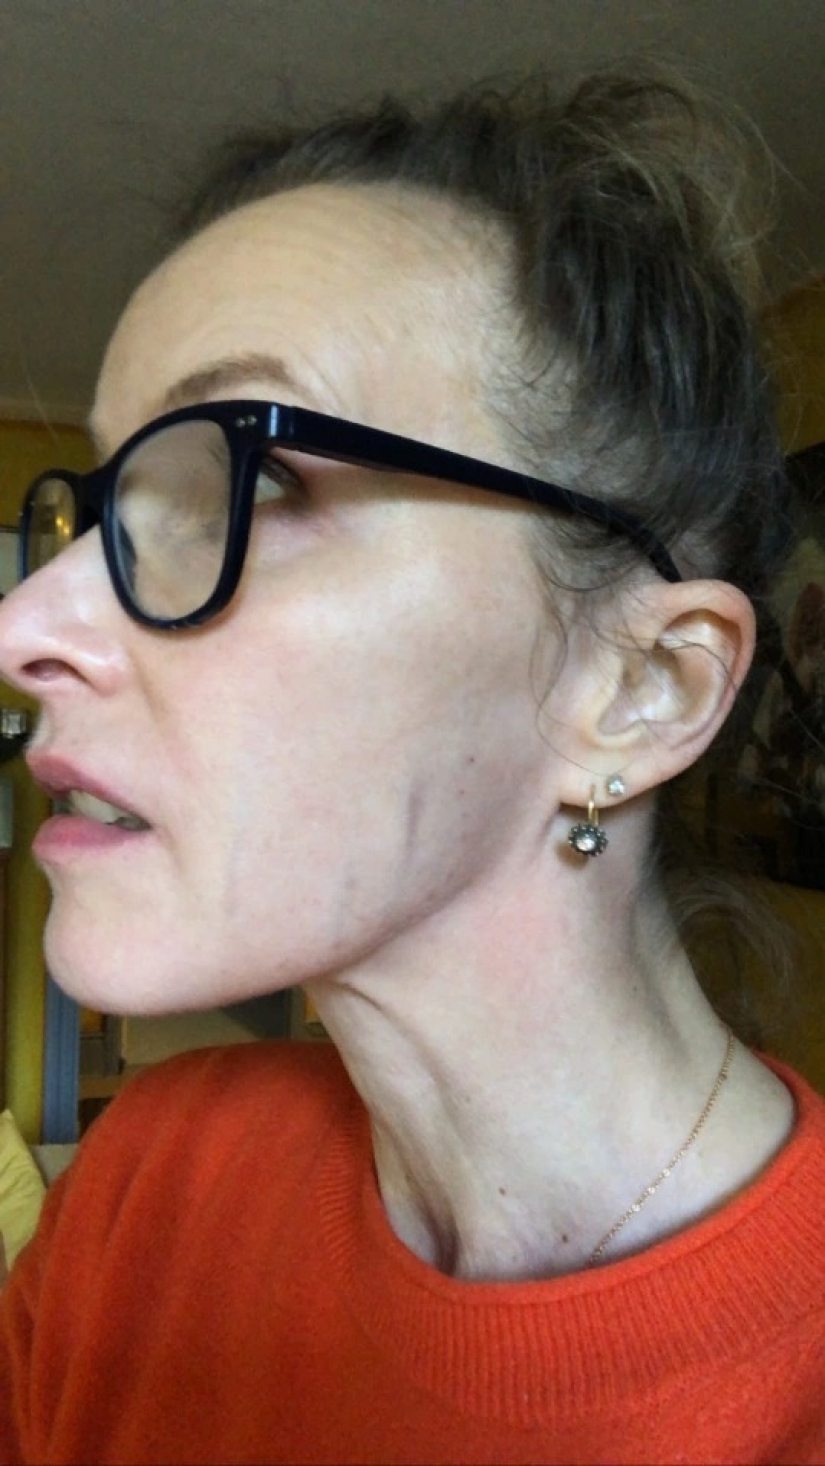 On her own skin: the British woman experienced the effects of fashionable cosmetic procedures